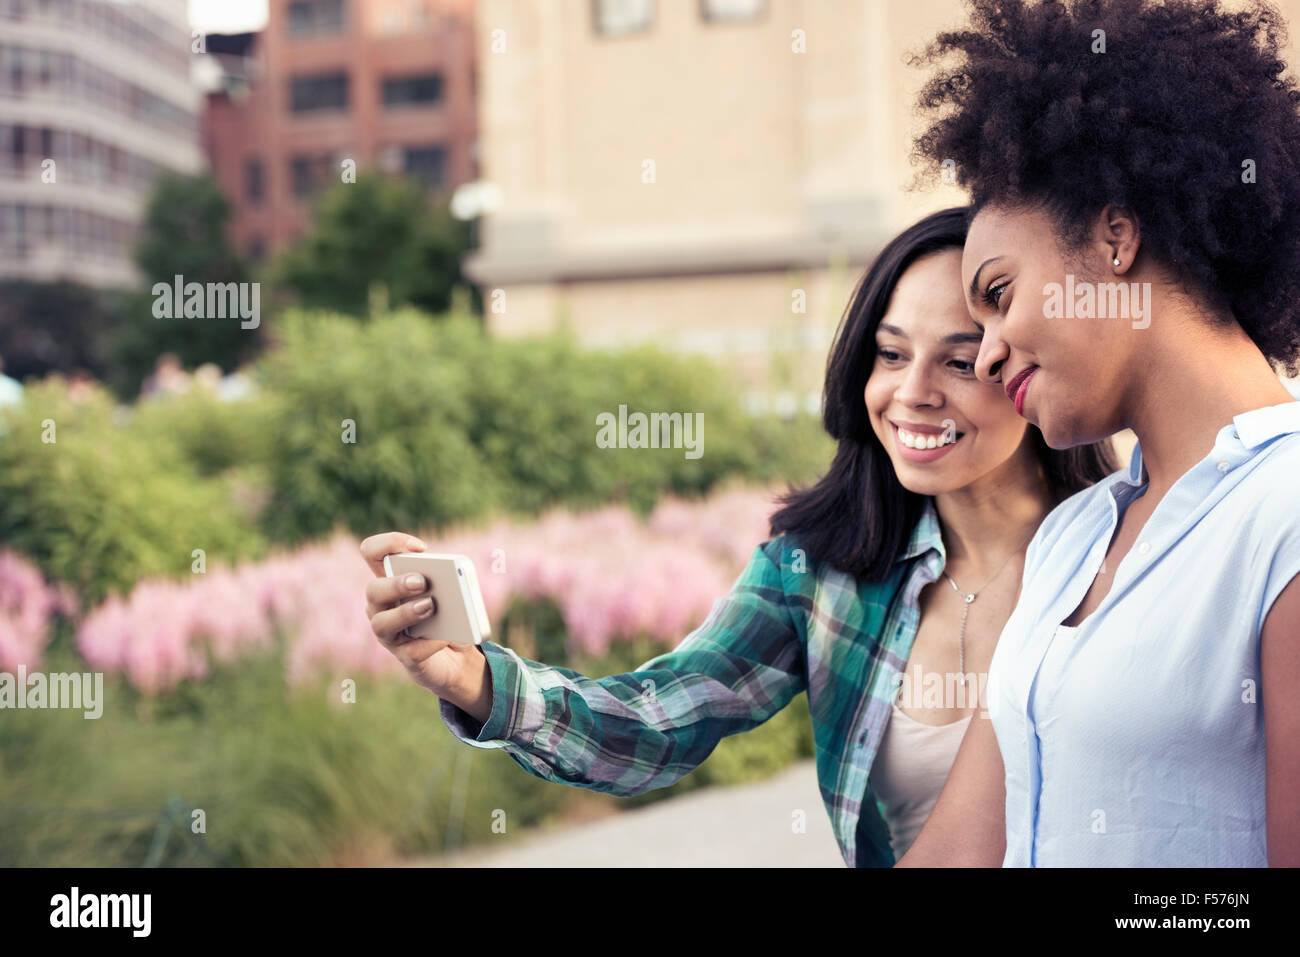 Two women posing and taking a selfie in the city Stock Photo